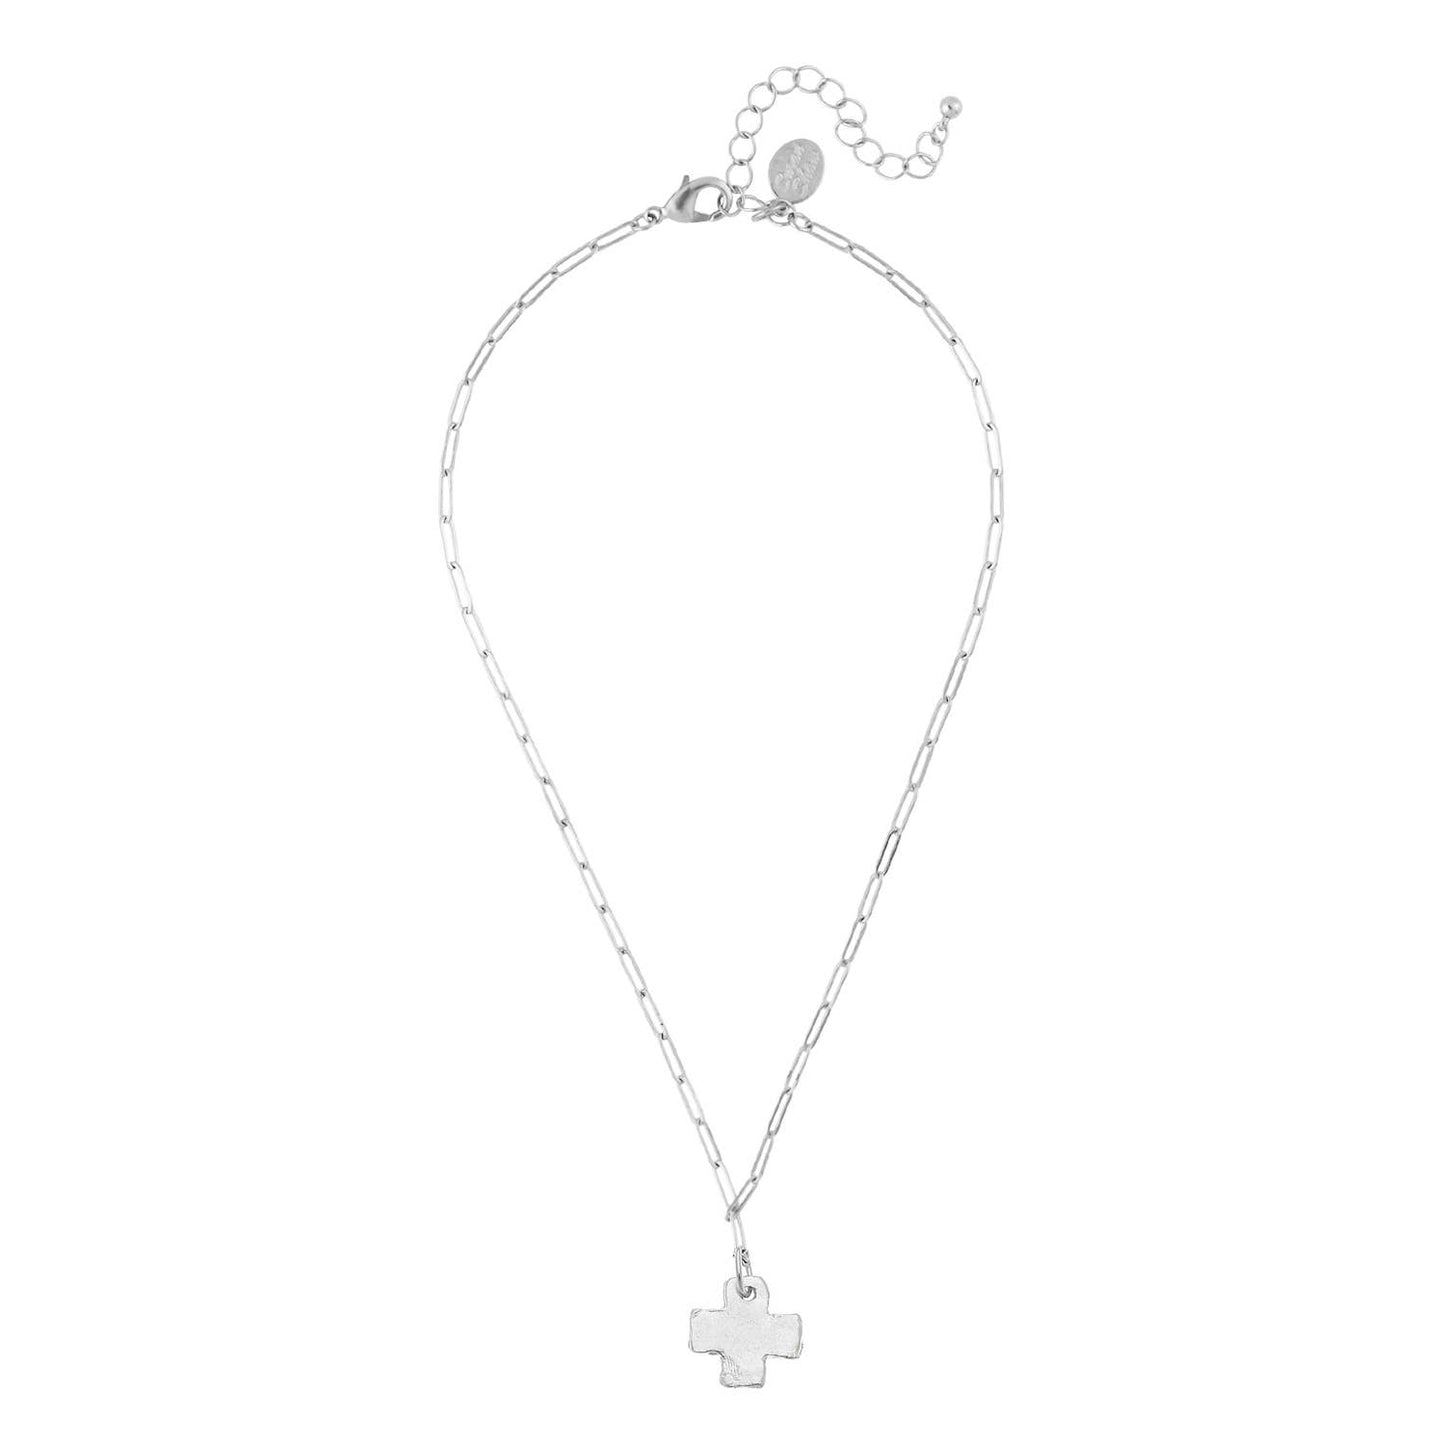 Silver Cross Paperclip Chain